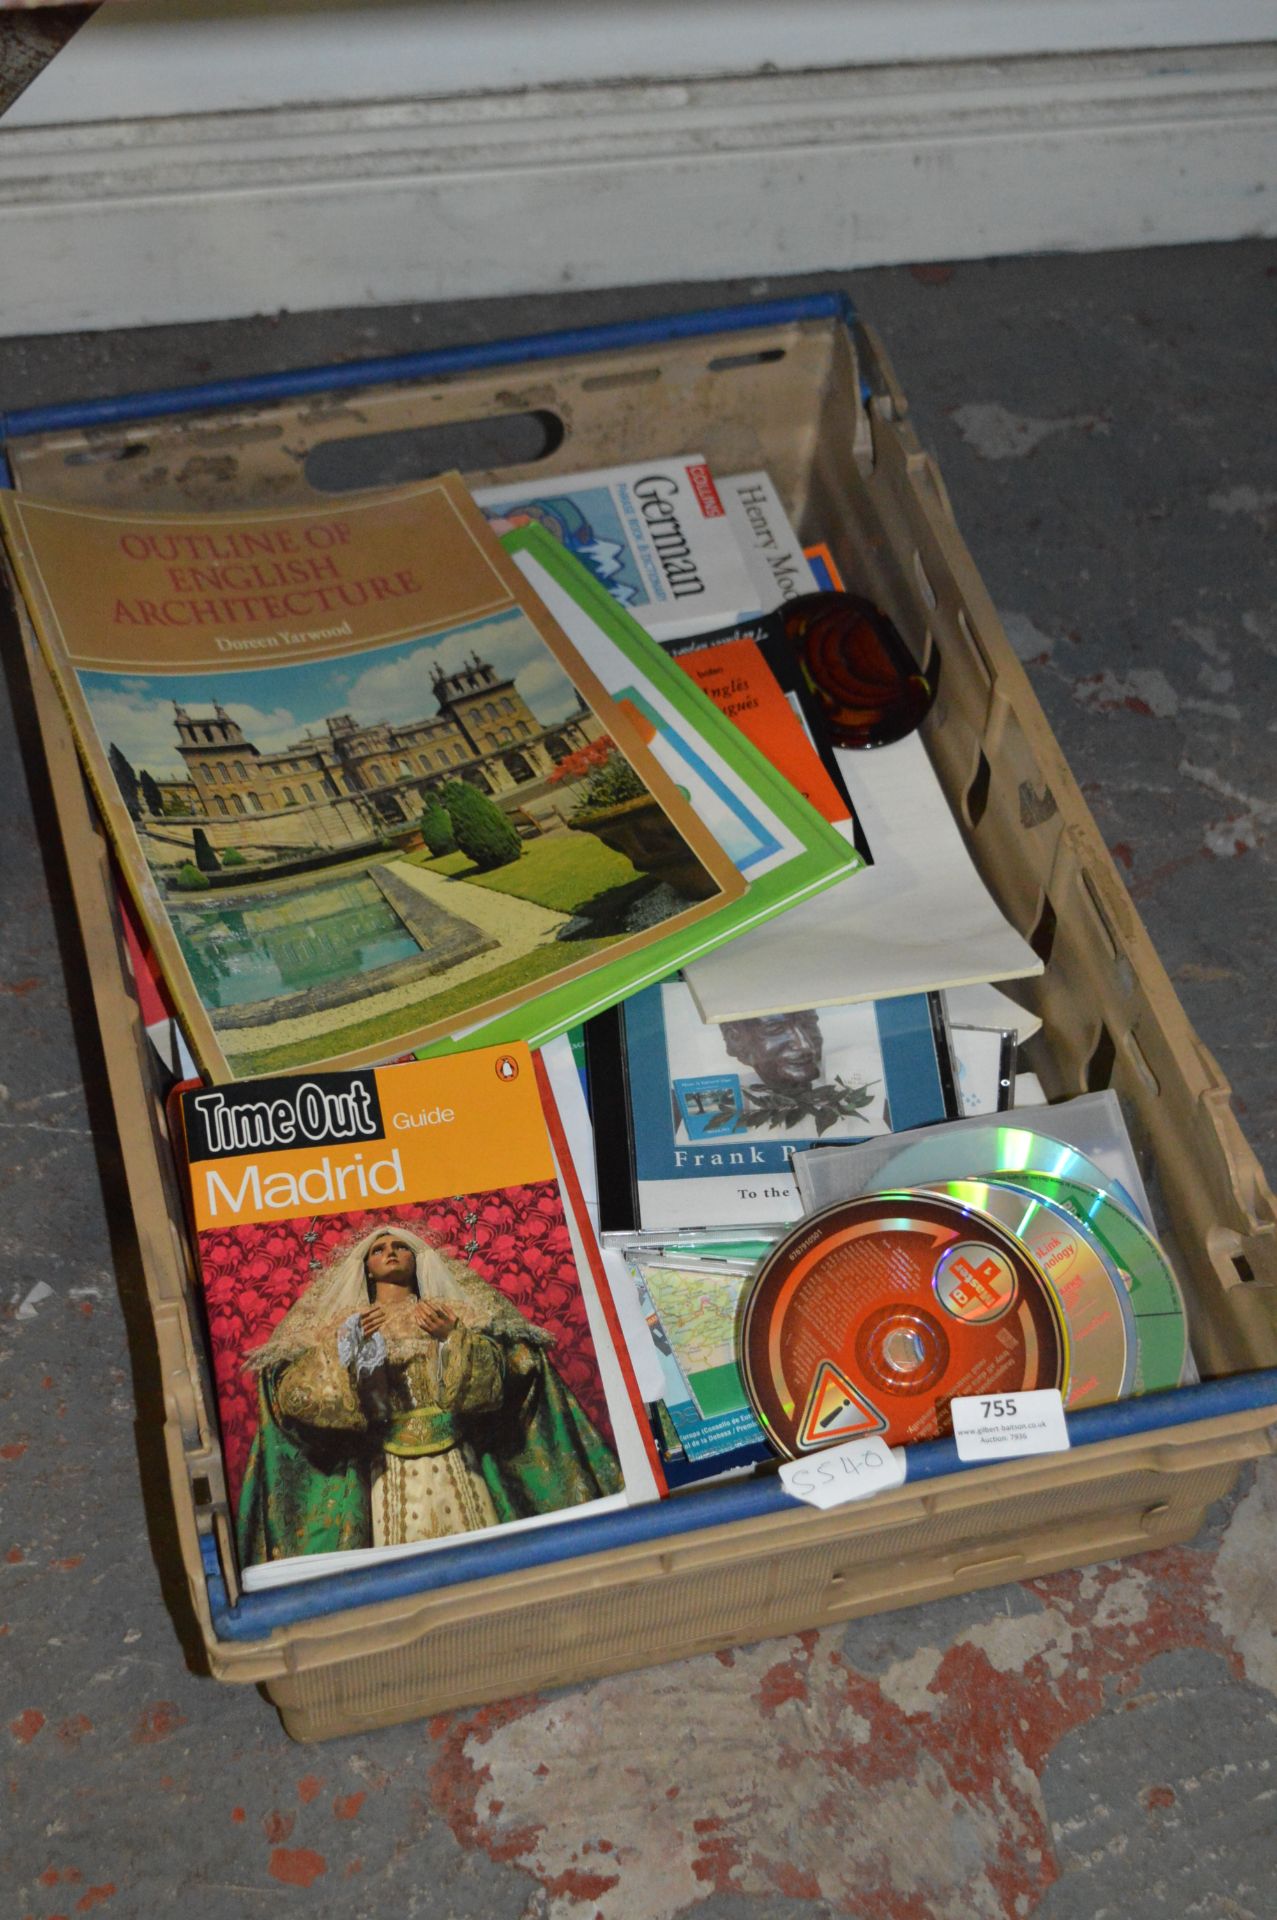 Box Containing Books and CDs